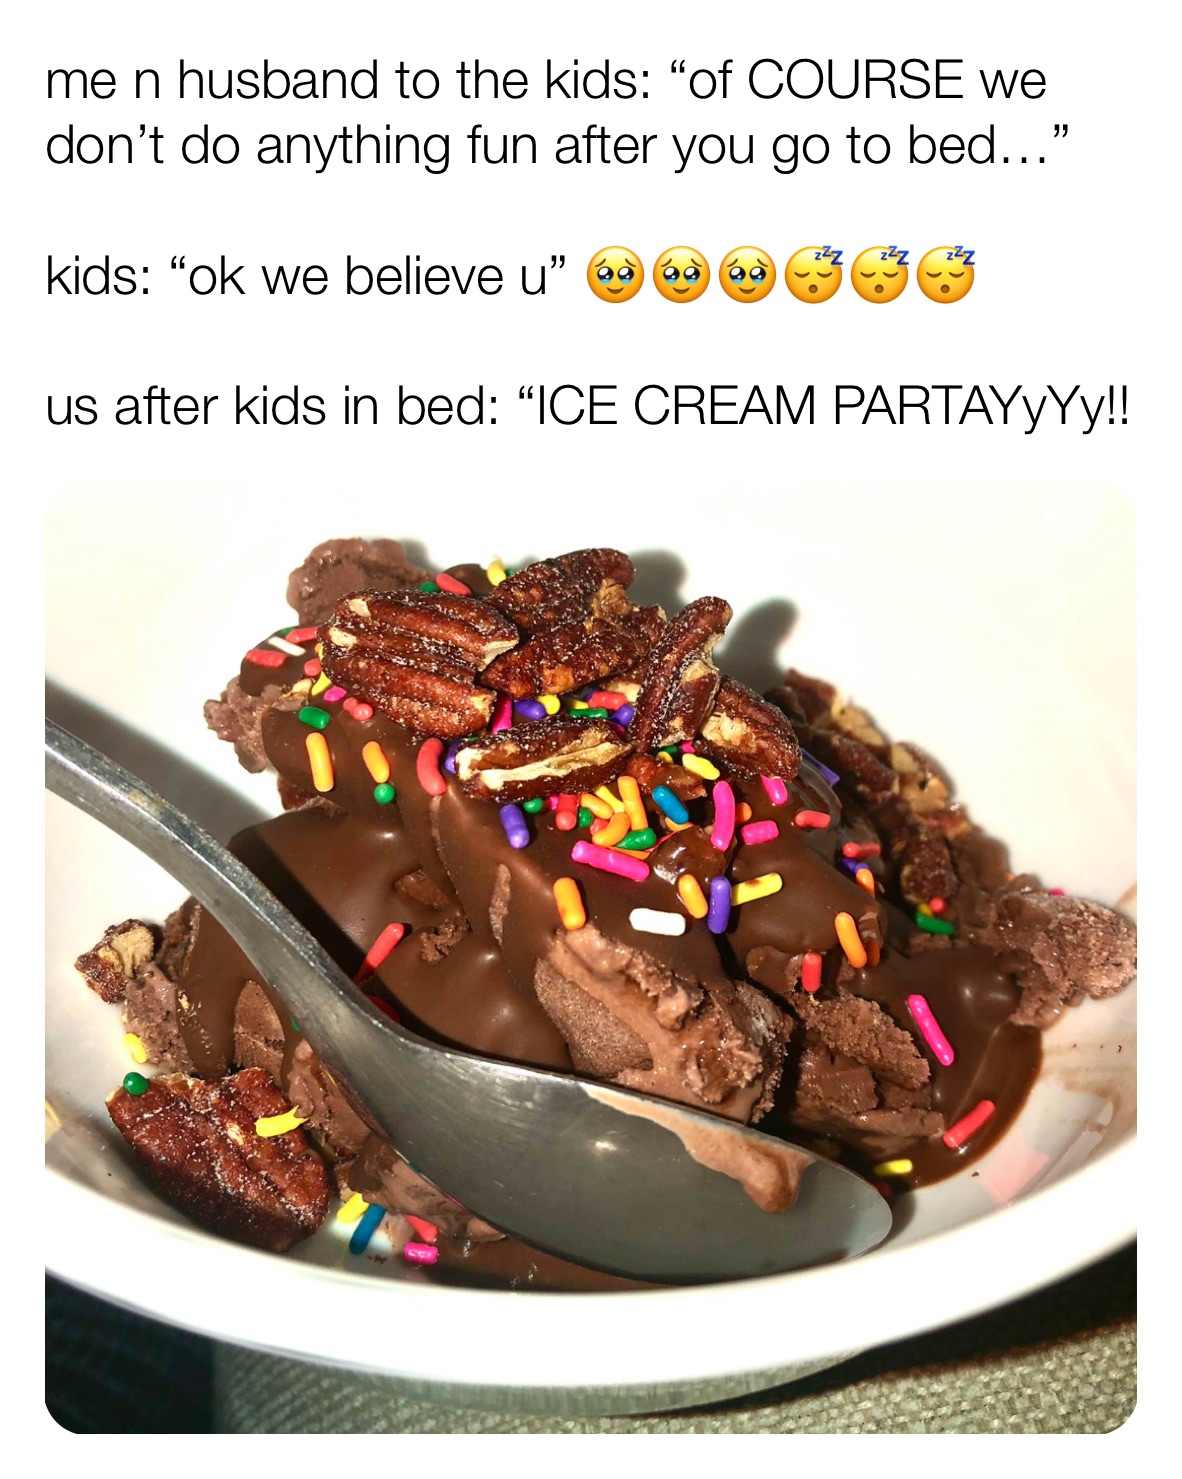 me n husband to the kids: “of COURSE we don’t do anything fun after you go to bed…”

kids: “ok we believe u” 🥹🥹🥹😴😴😴

us after kids in bed: “ICE CREAM PARTAYyYy!!